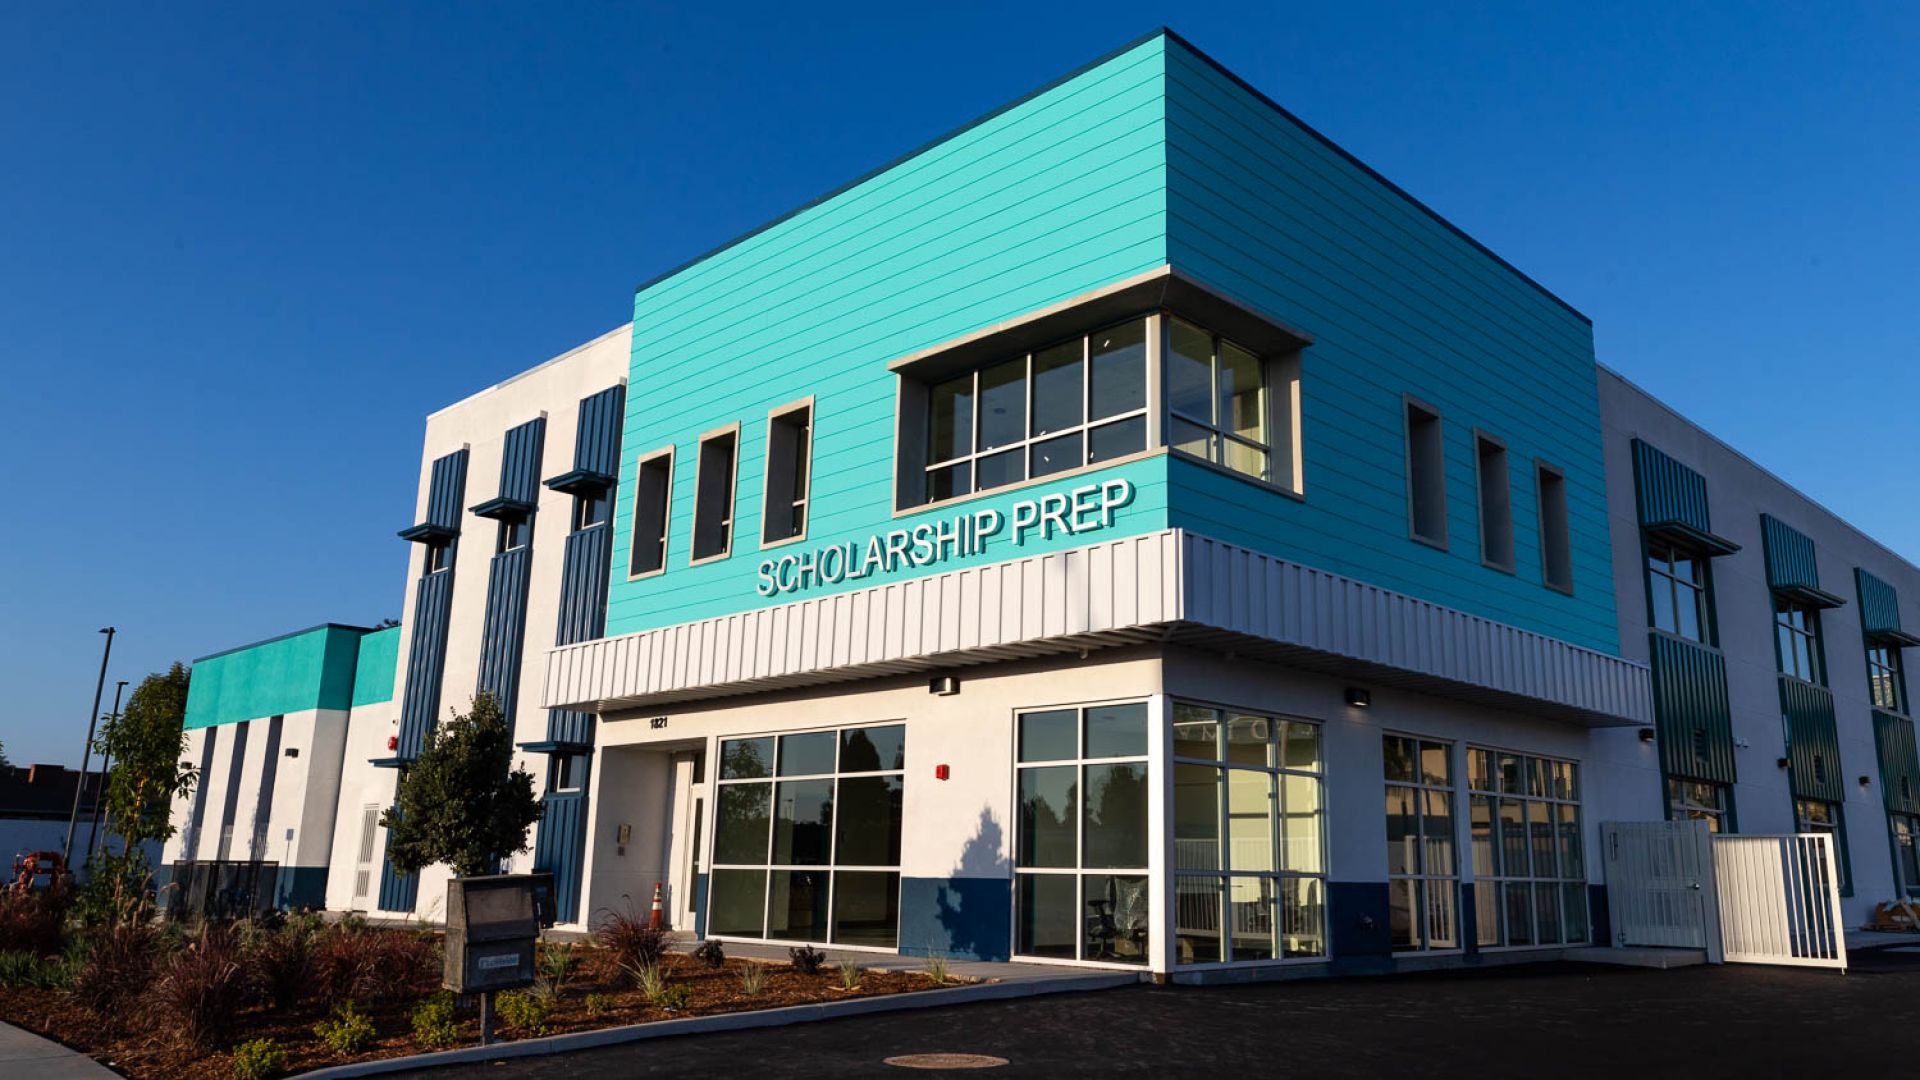 Grand Opening at Scholarship Prep's TK-3 Grand Avenue Campus